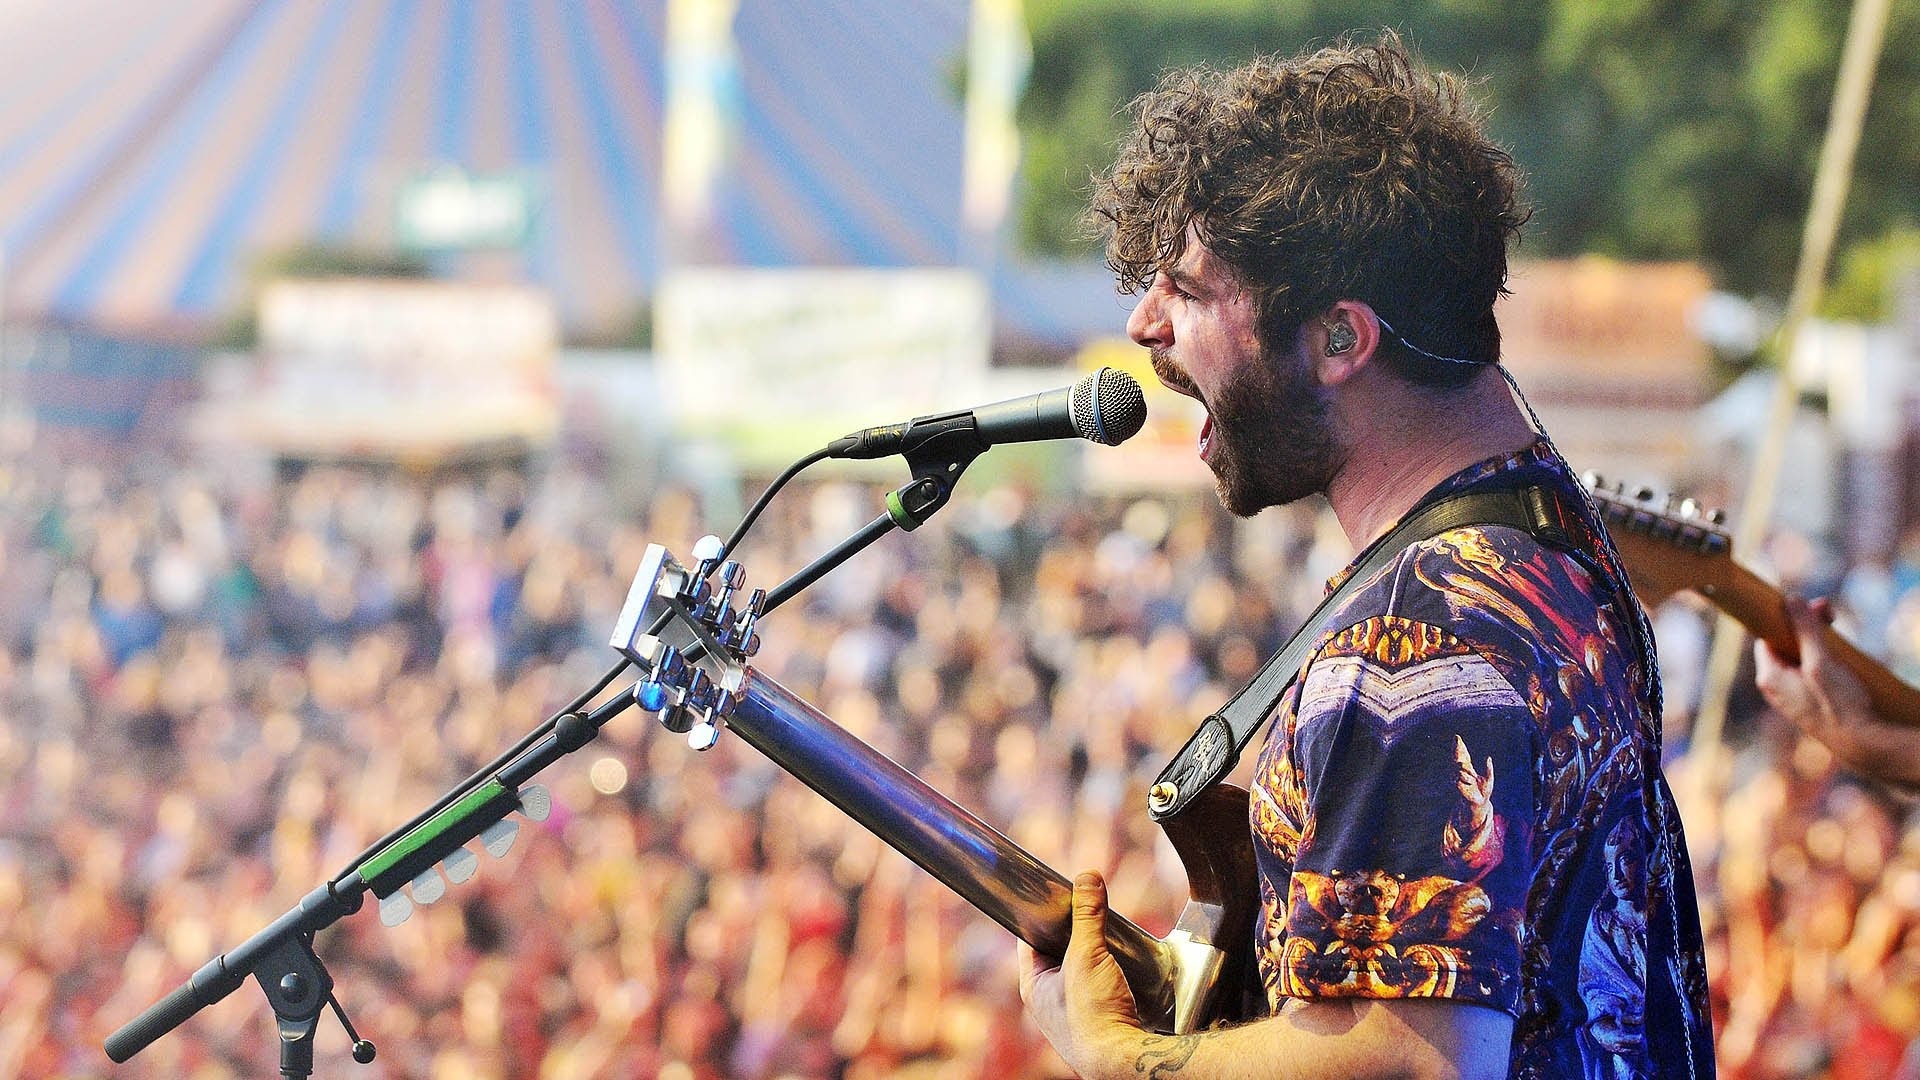 FOALS UK arena dates, Exciting concert experience, Live music greatness, Must-attend show, 1920x1080 Full HD Desktop